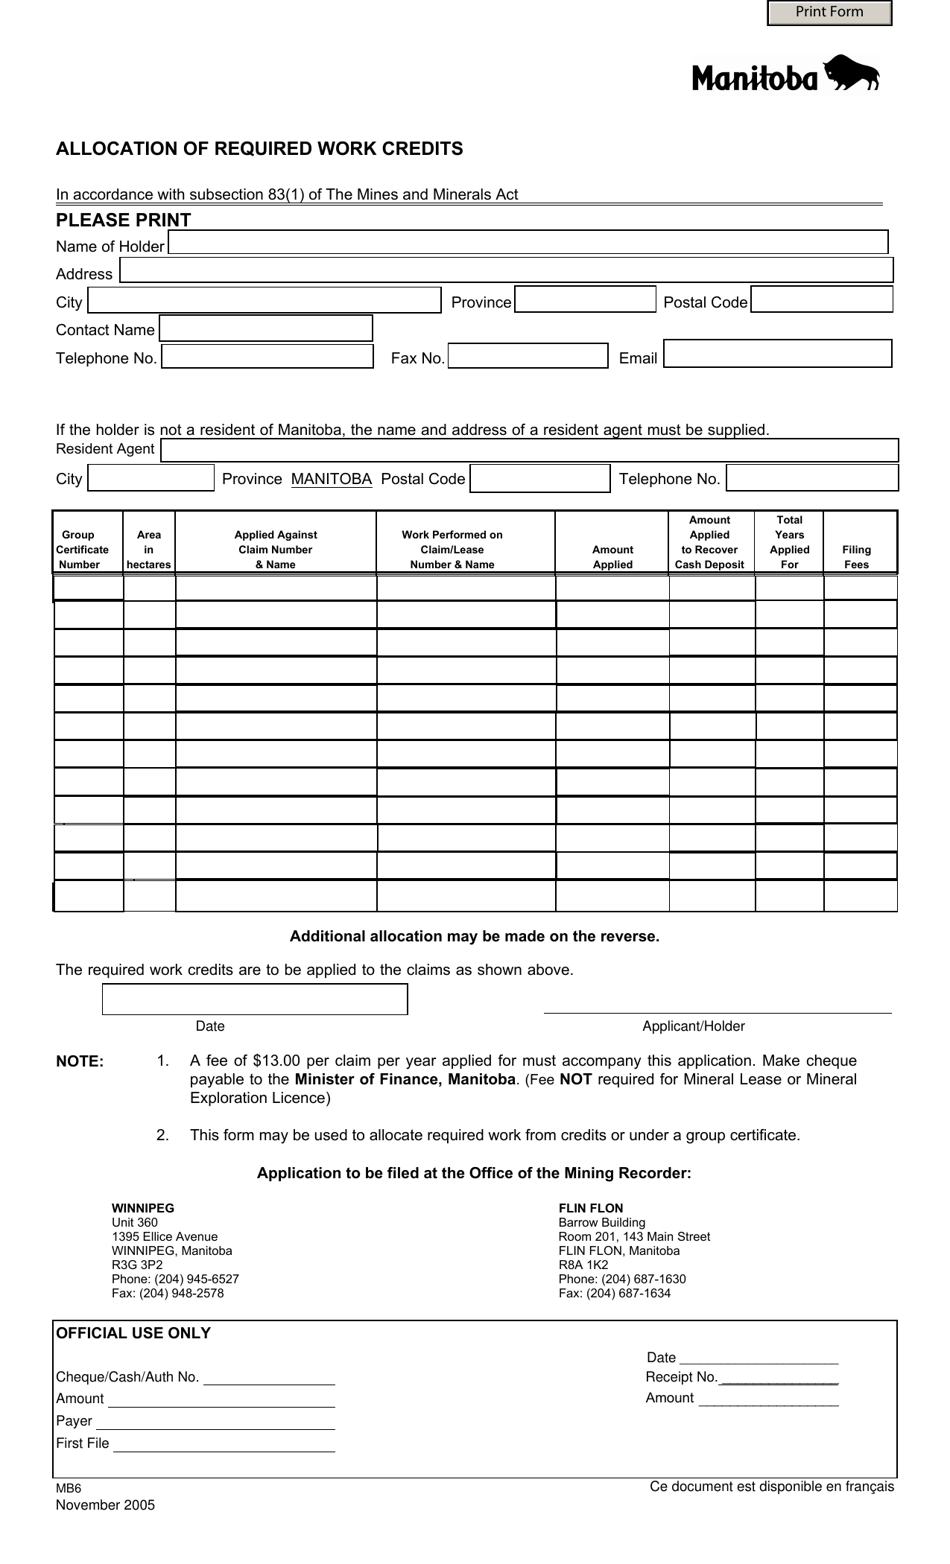 Form MB6 Allocation of Required Work Credits - Manitoba, Canada, Page 1